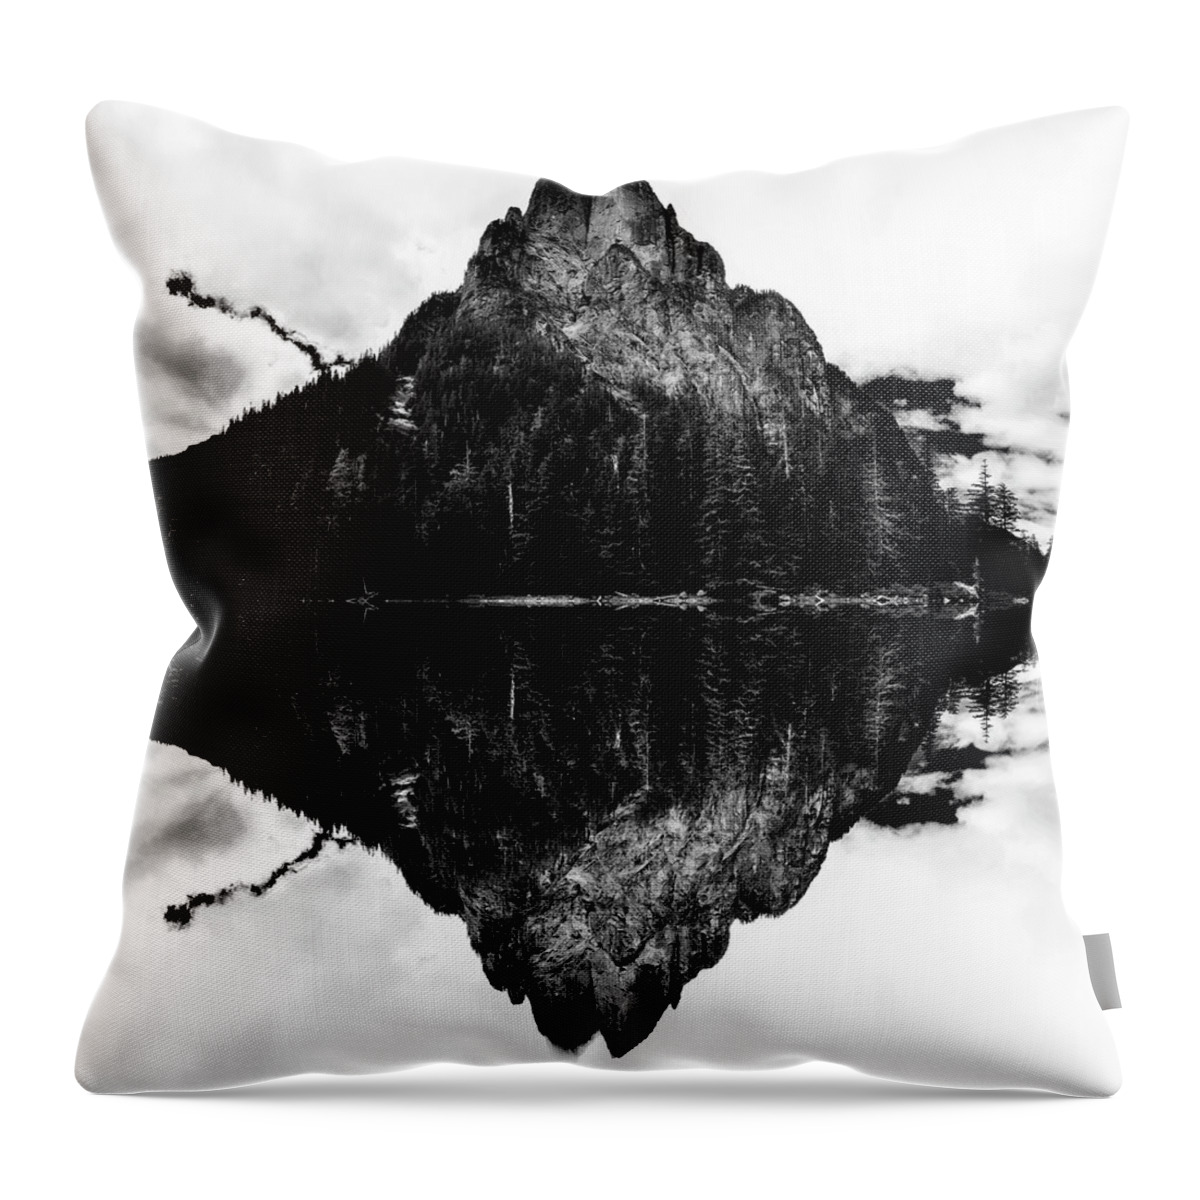 Epic Throw Pillow featuring the digital art Baring Mountain Reflection by Pelo Blanco Photo